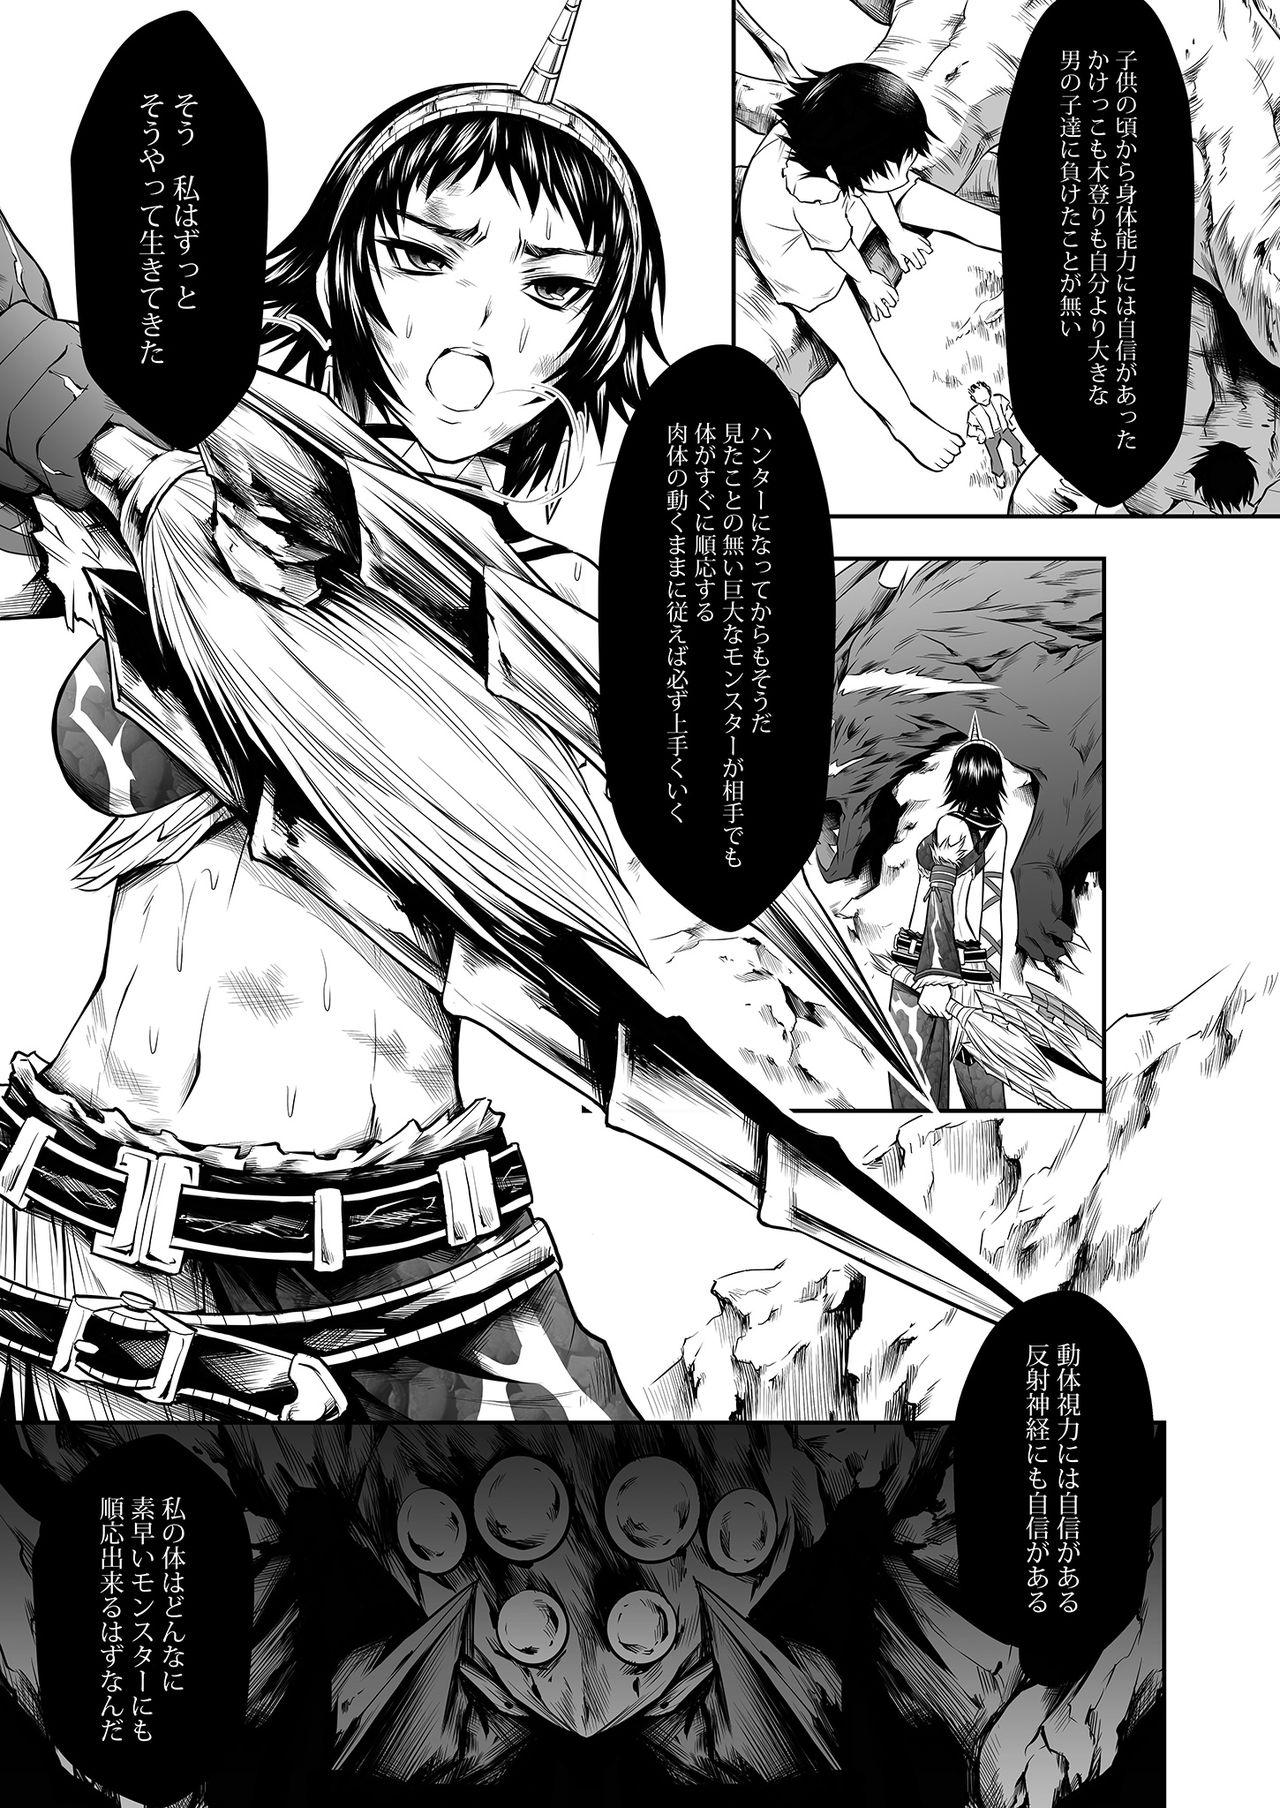 Best Blowjobs Ever Pair Hunter no Seitai vol.2-2 - Monster hunter Free - Page 5